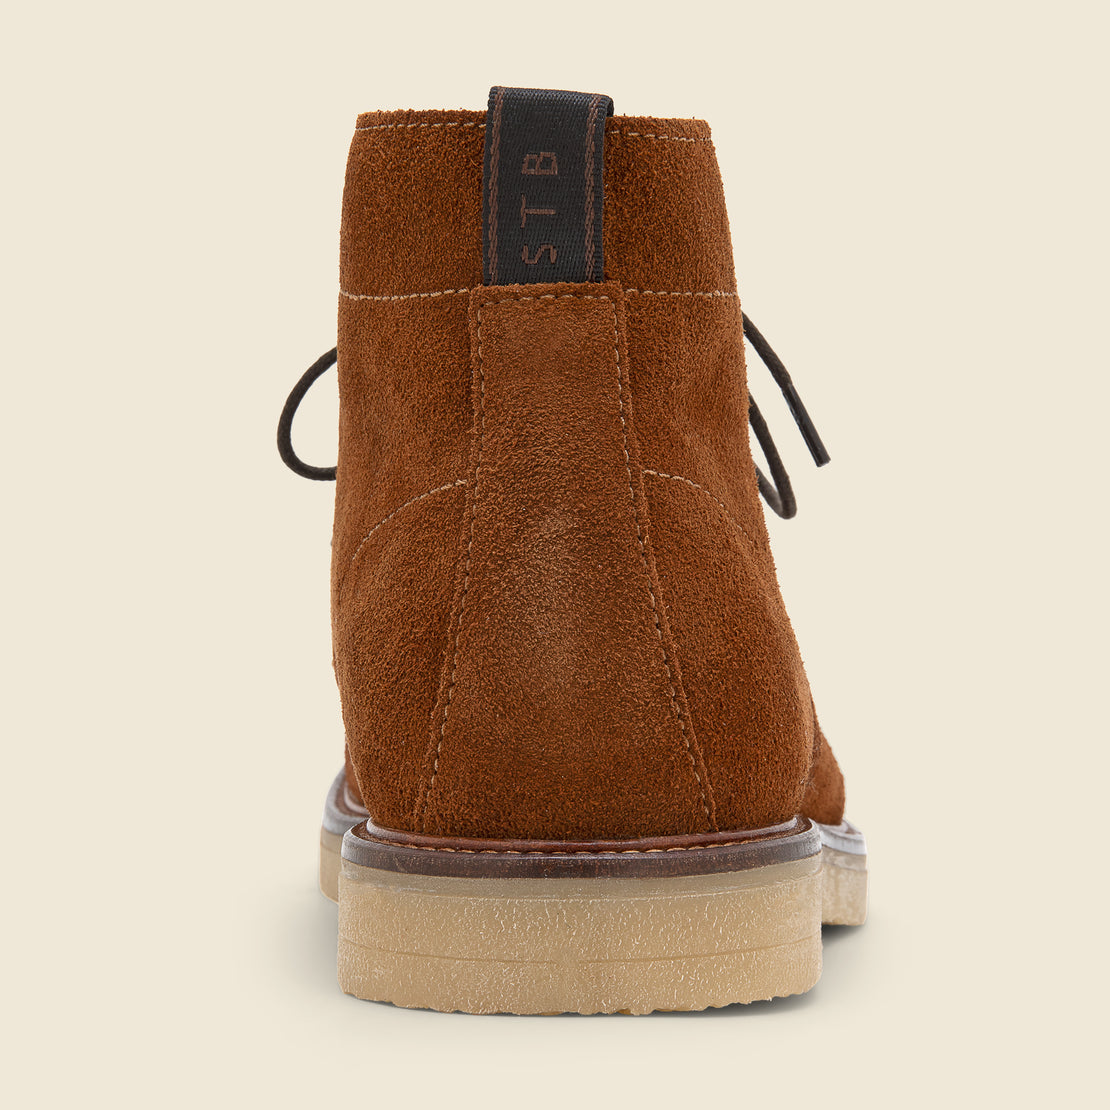 Kip Suede Apron Boot - Tan - Shoe the Bear - STAG Provisions - Shoes - Boots / Chukkas